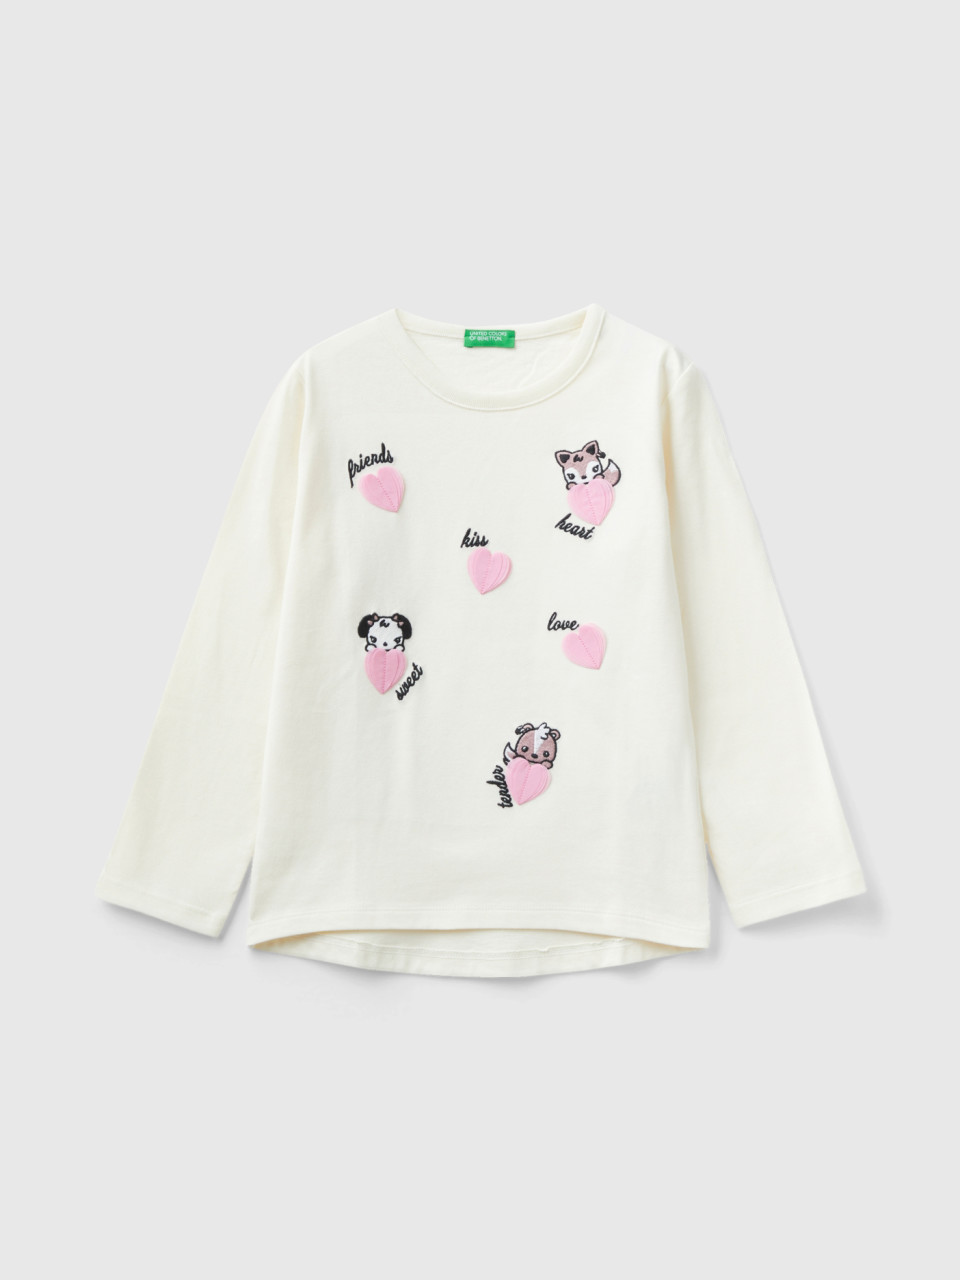 Benetton, T-shirt With Embroidery And Appliques, Creamy White, Kids